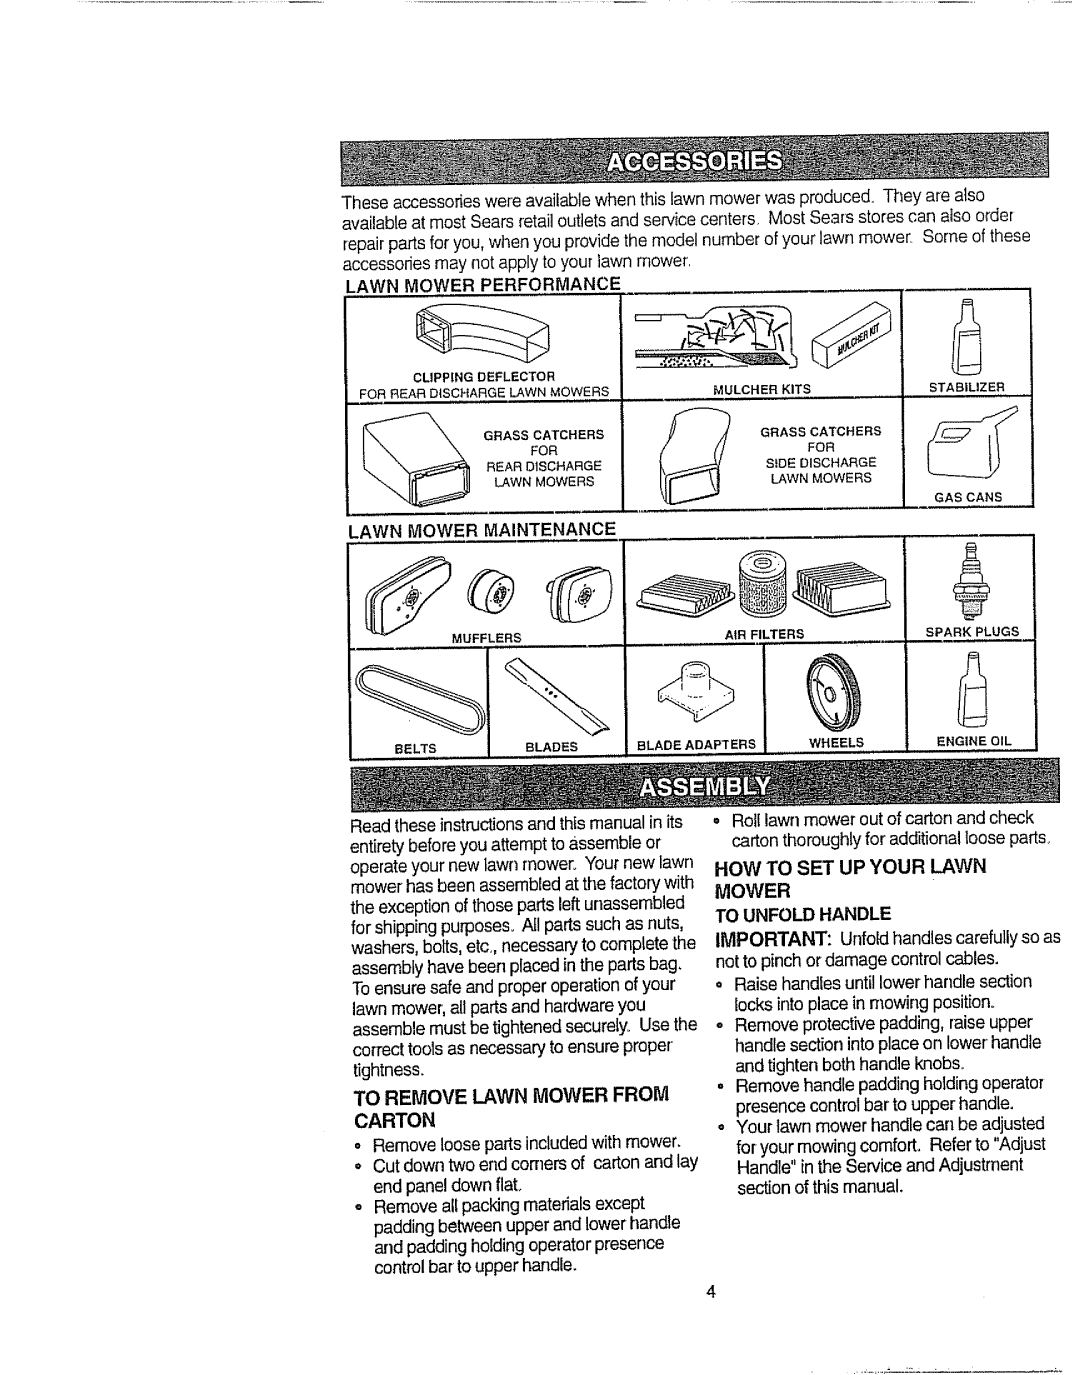 Craftsman 917.377592 manual How To Set Up Your Lawn Mower, _wERMAINTE_, To Unfold Handle 